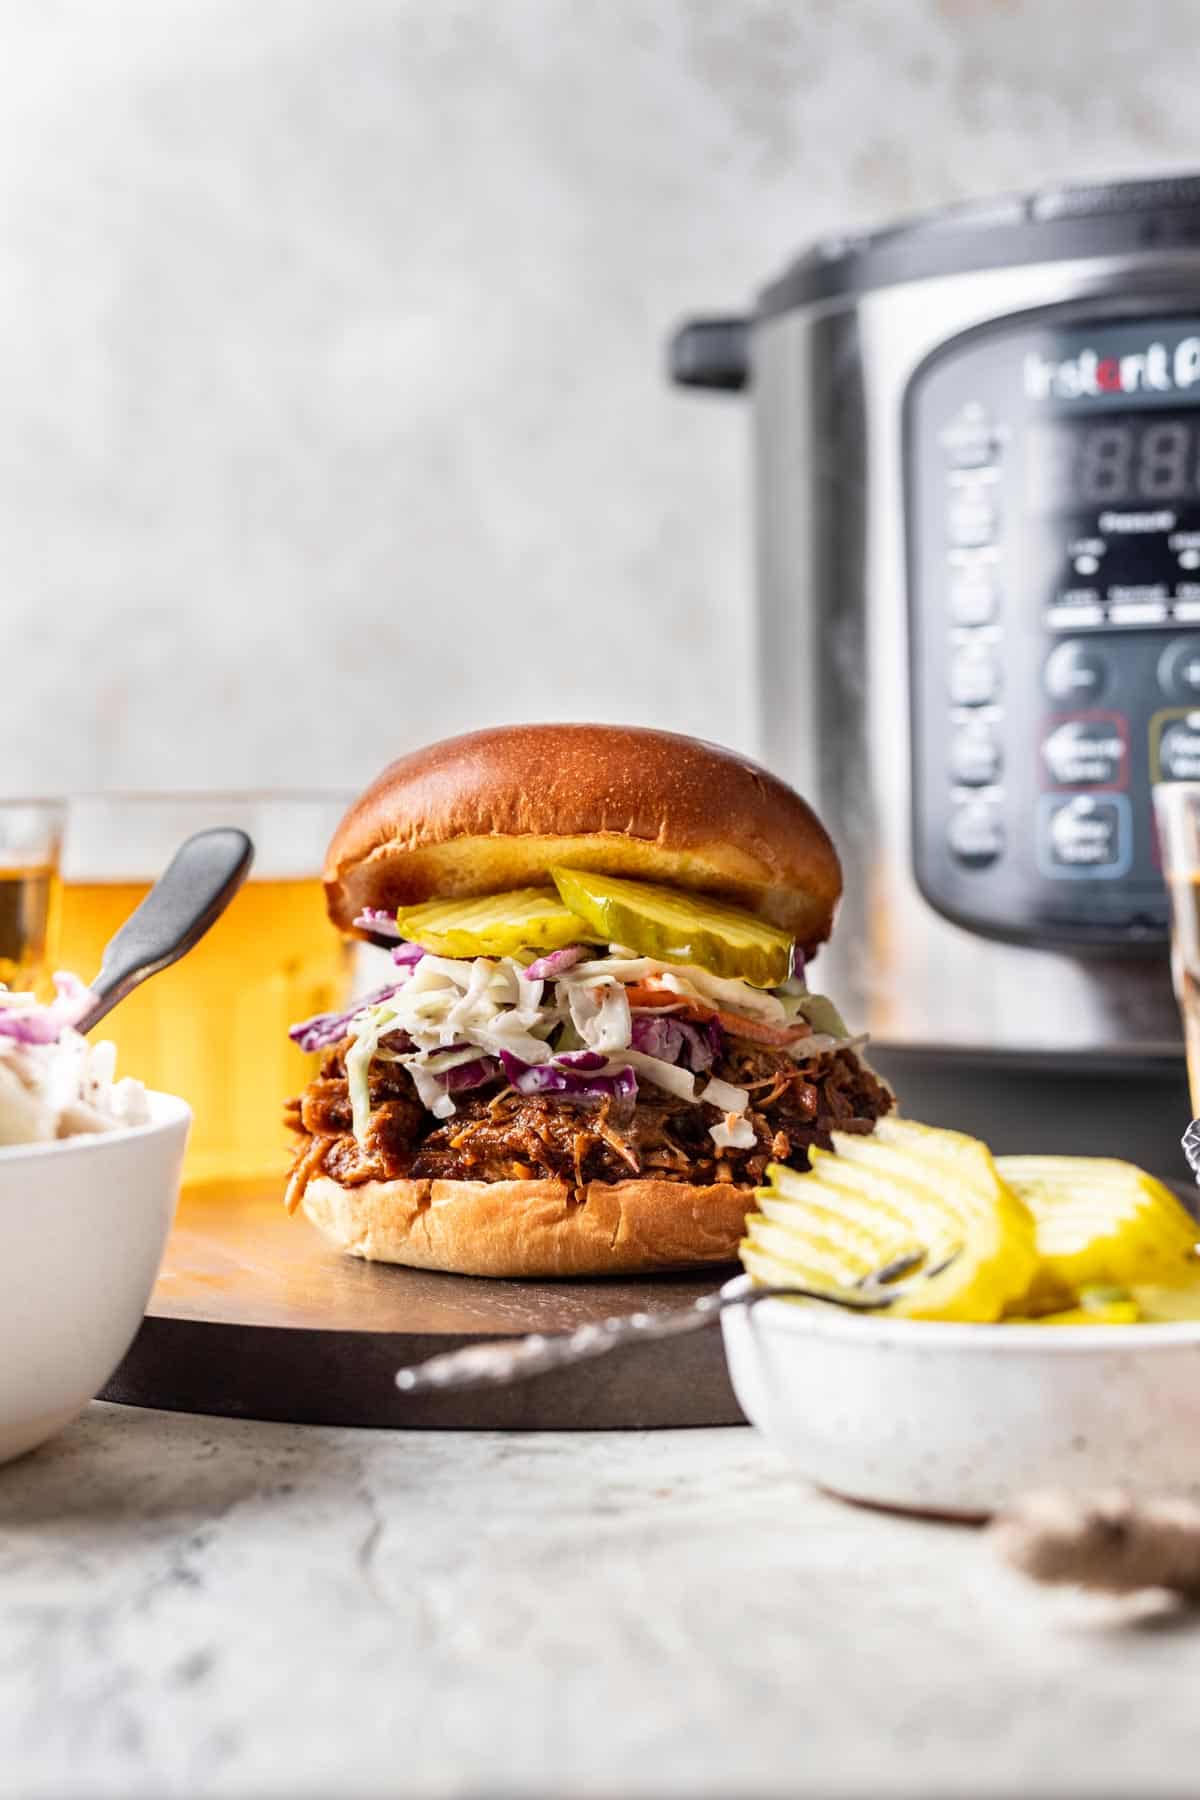 Shredded instant pot pork butt in sauce on a bun with pickles and slaw.